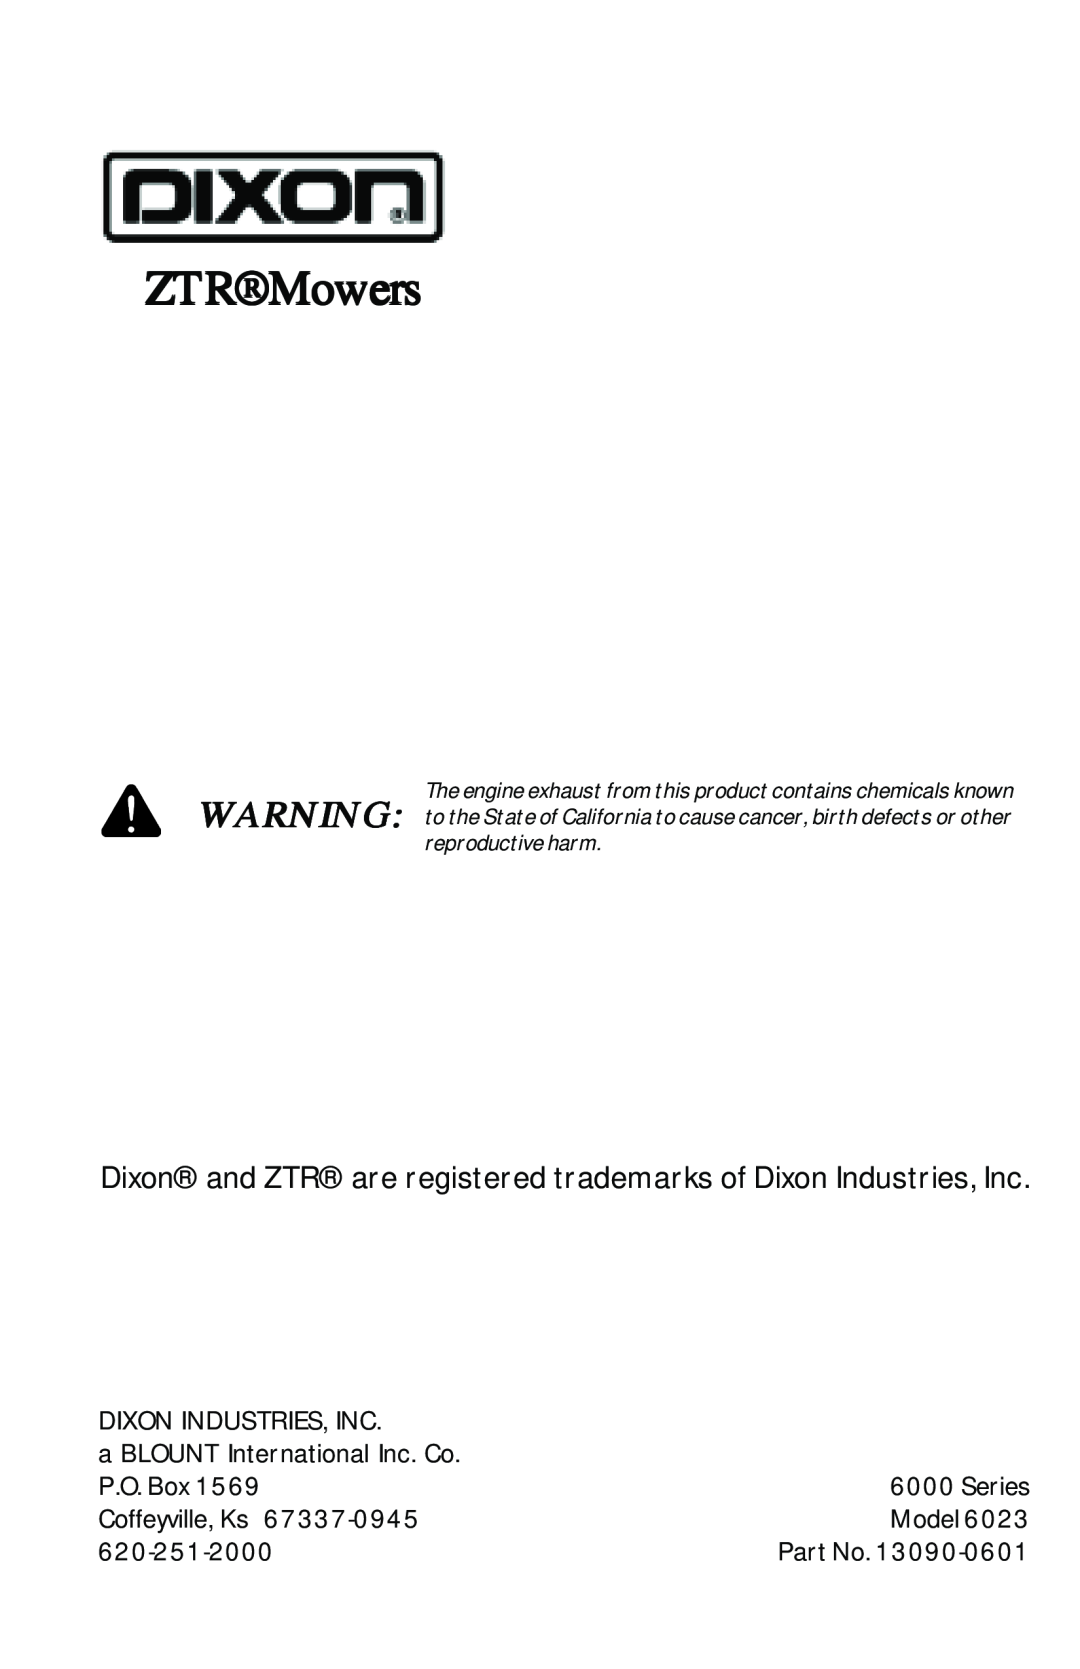 Dixon ZTR 6023, 13090-0601 ZTRMowers, Dixon and ZTR are registered trademarks of Dixon Industries, Inc, reproductive harm 